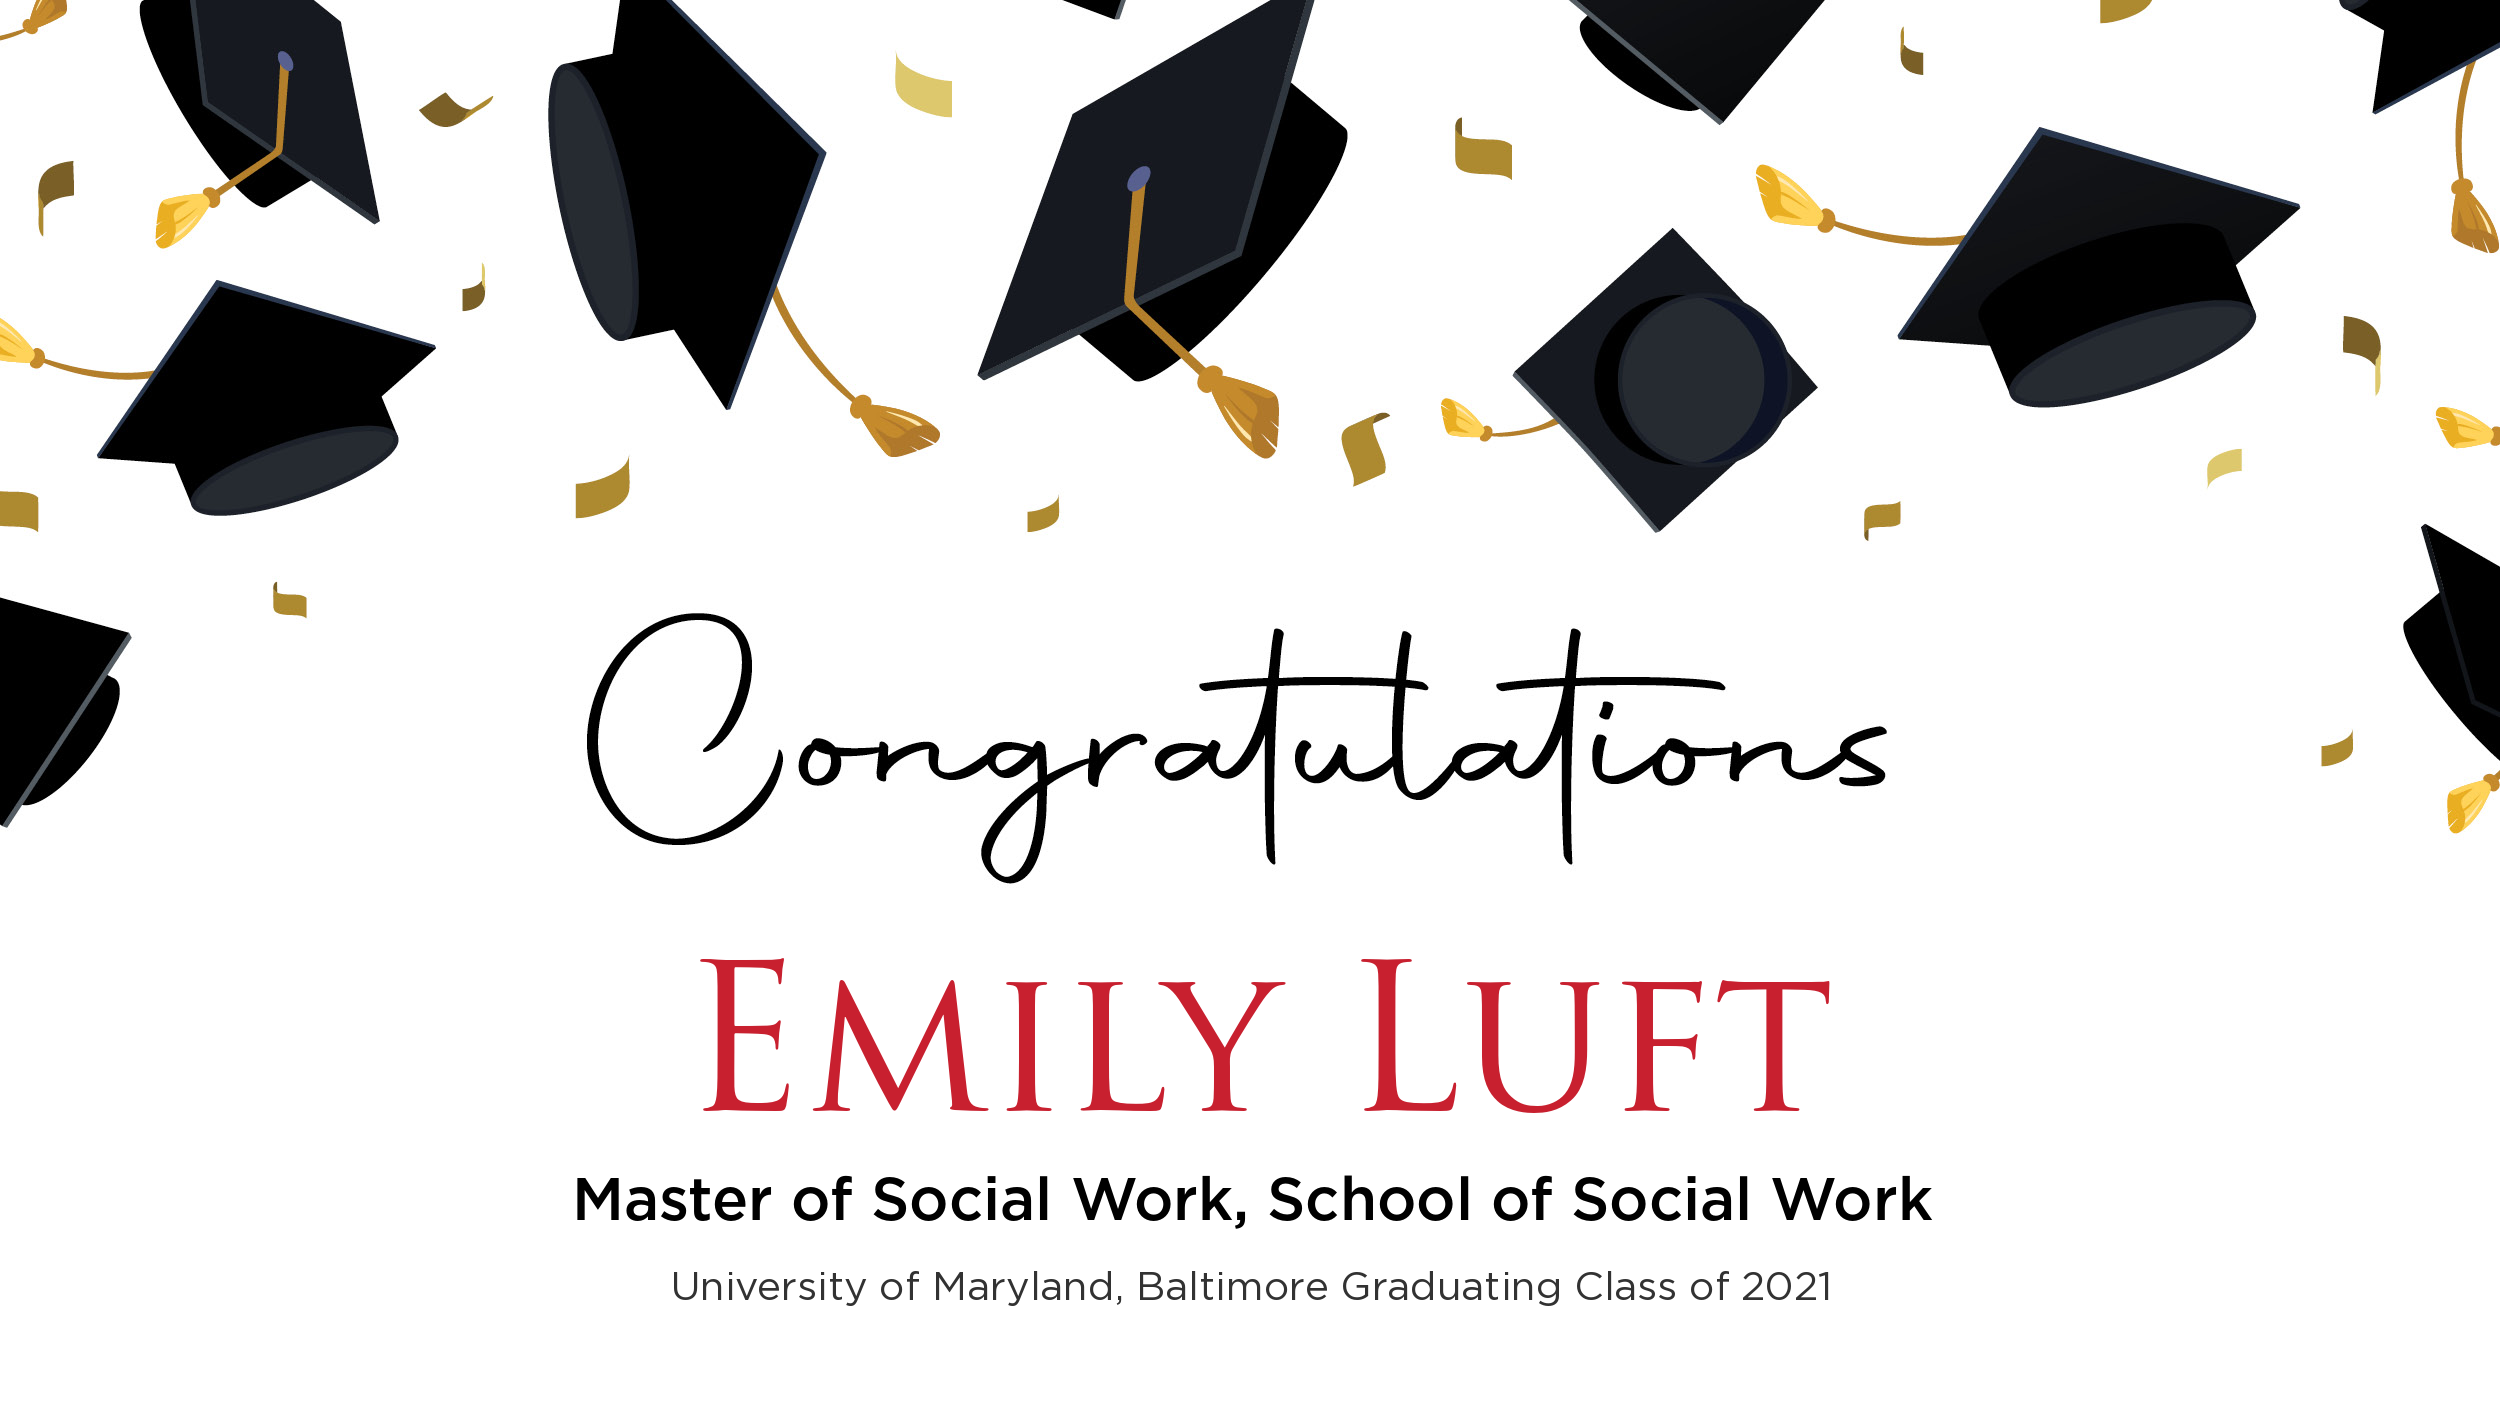 Congratulations Emily Luft, Master of Social Work